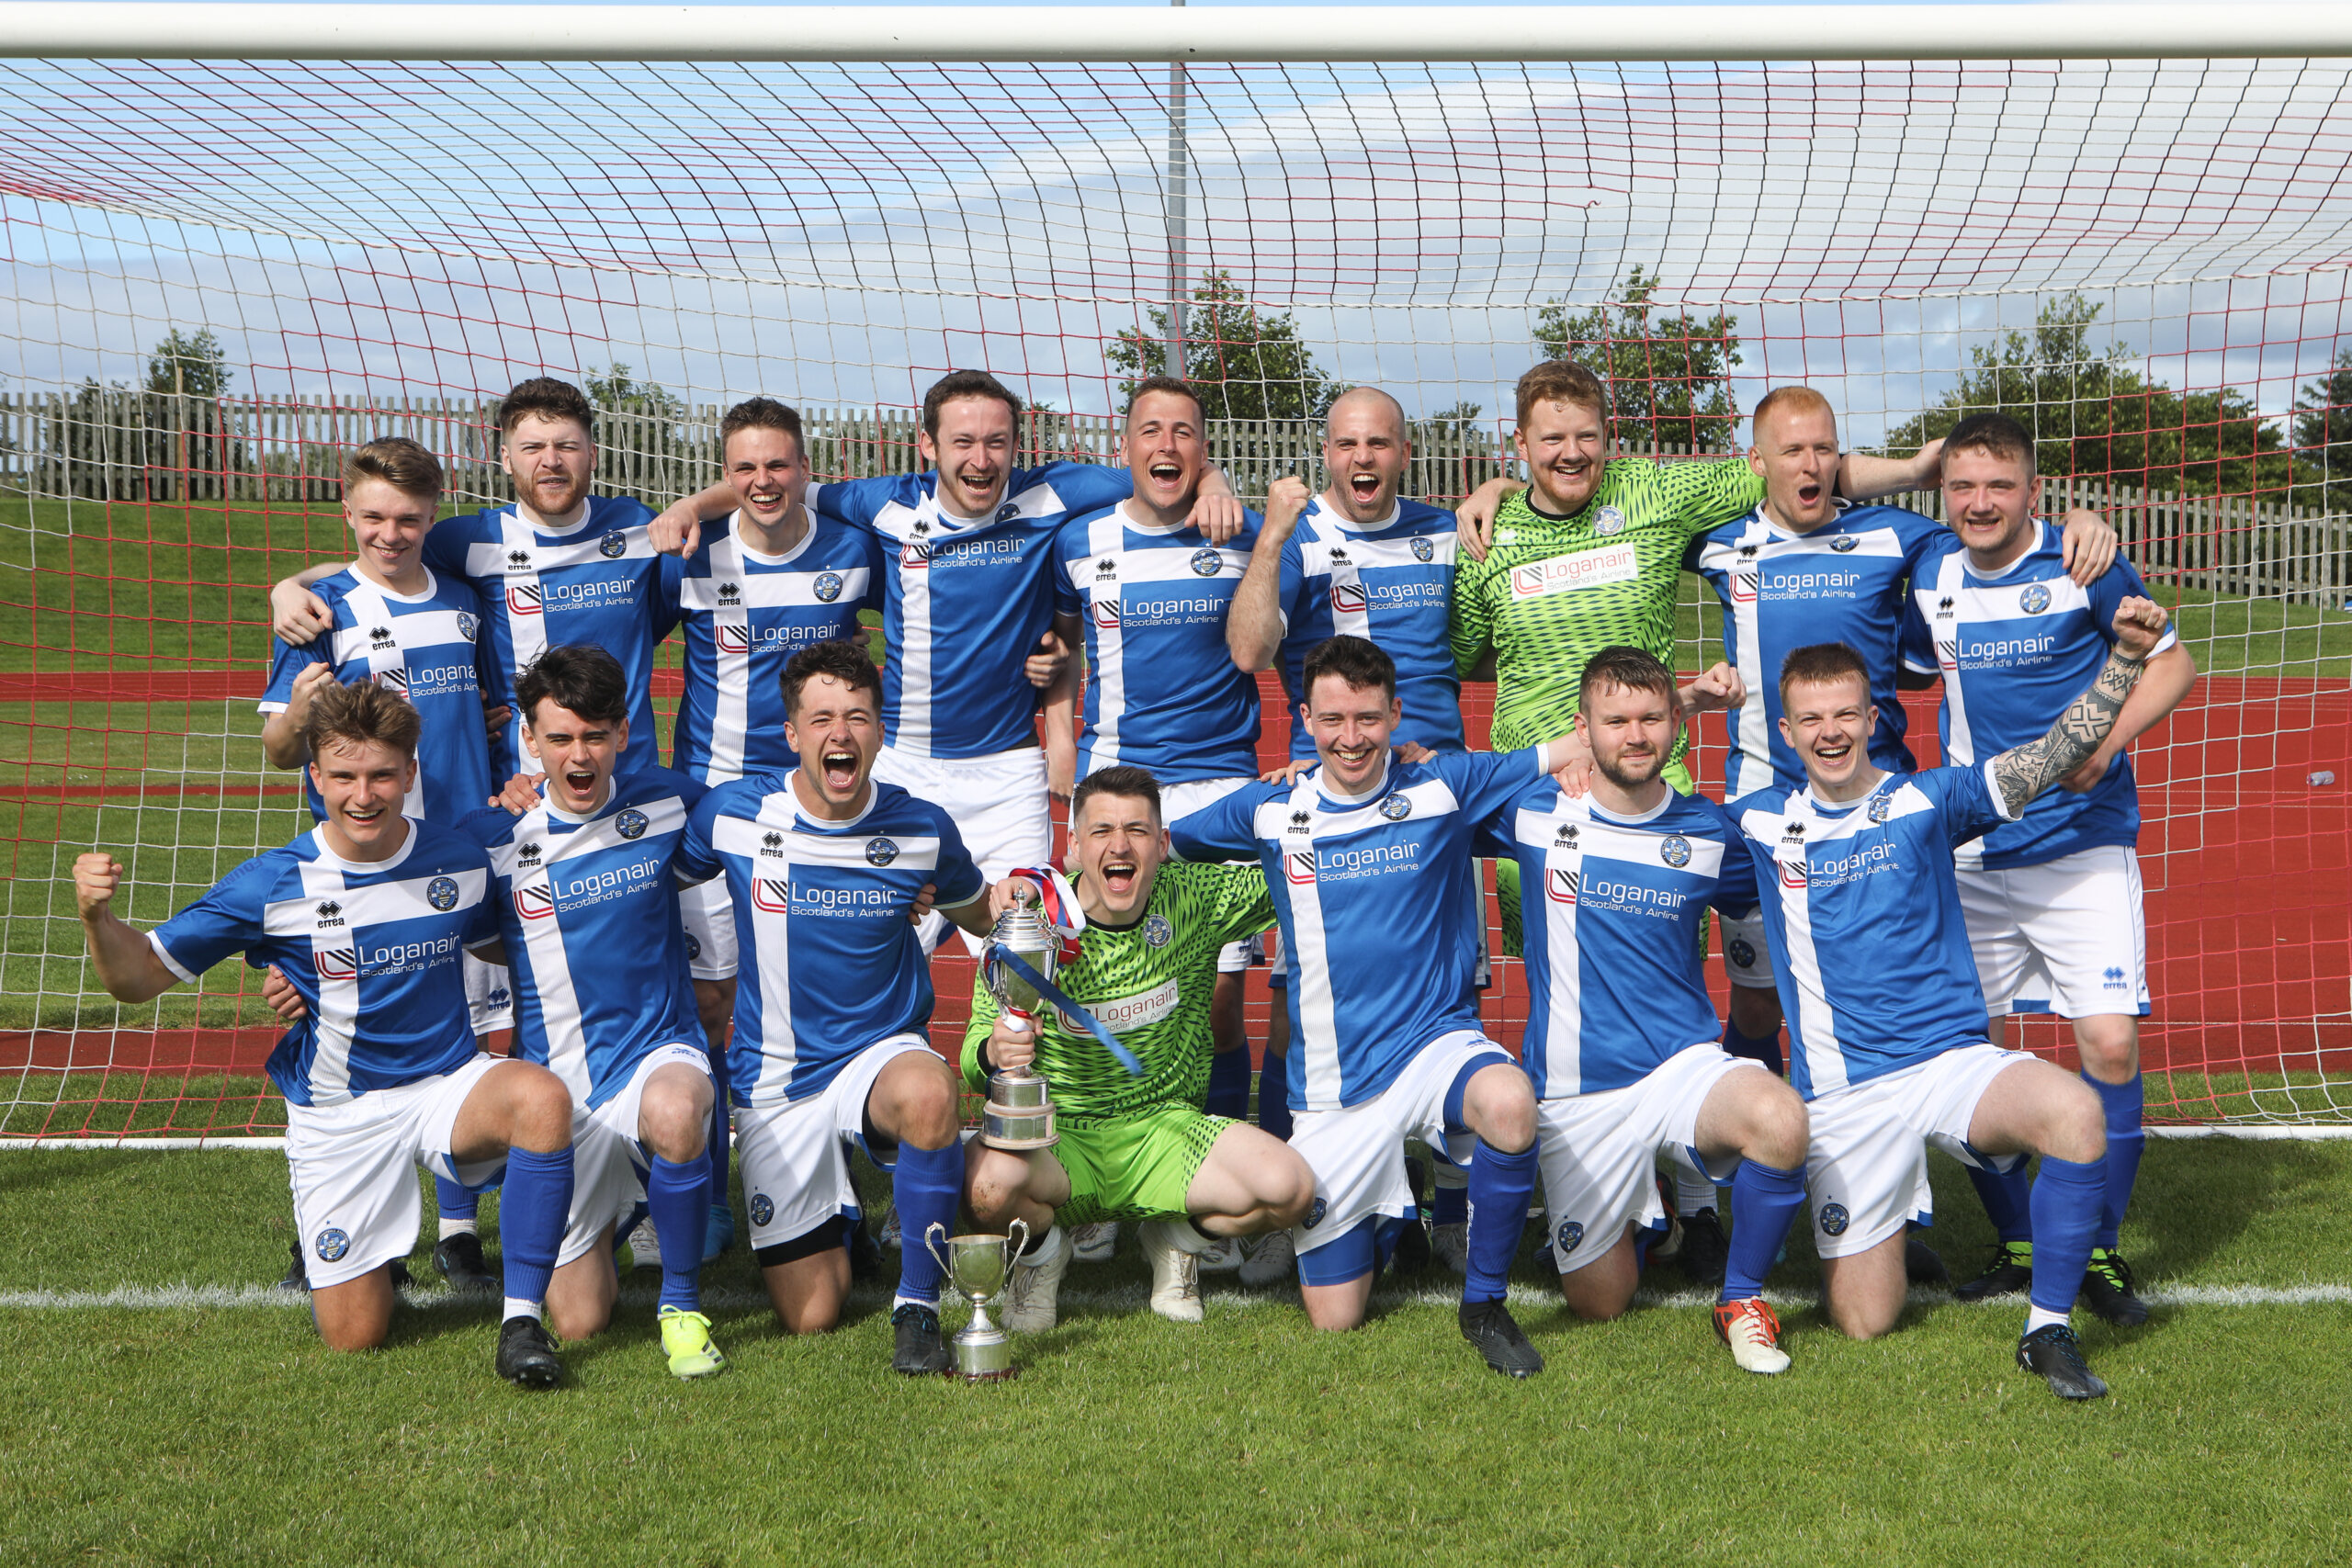 Football side discover island games opponents | The Shetland Times Ltd